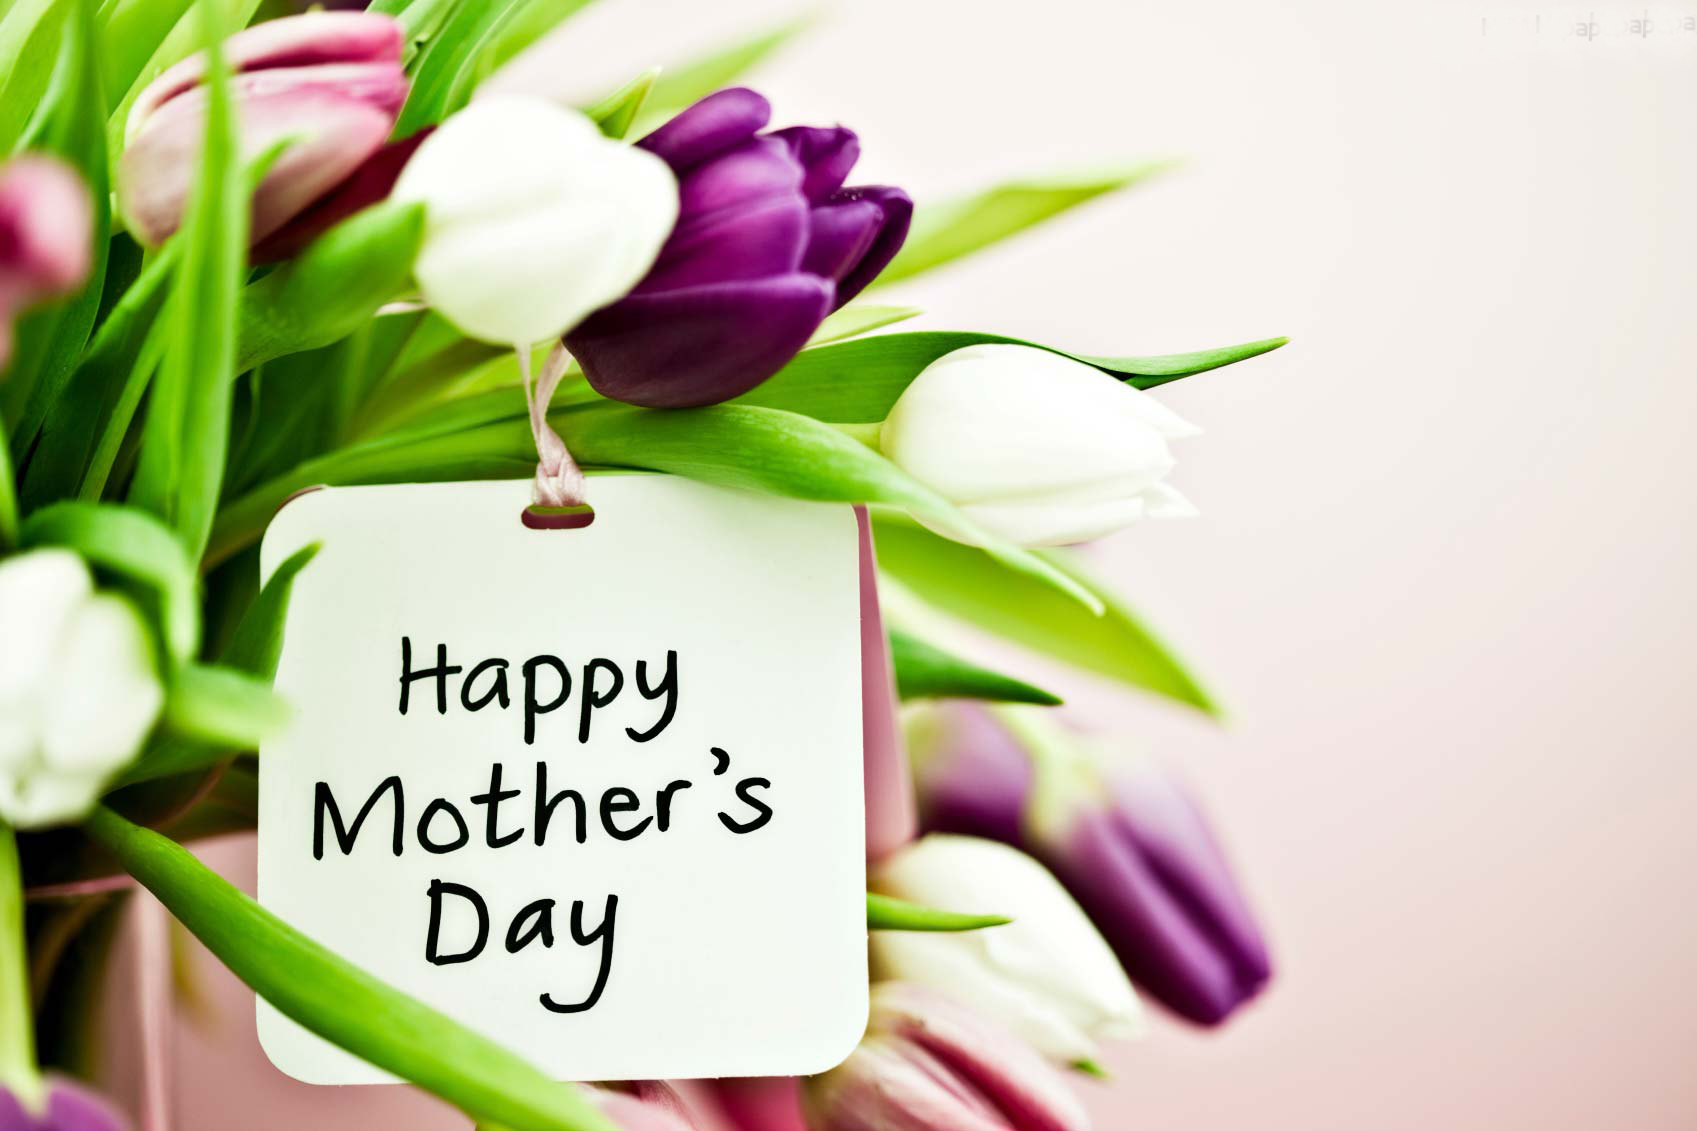 mothers day quotes tumblr 2019